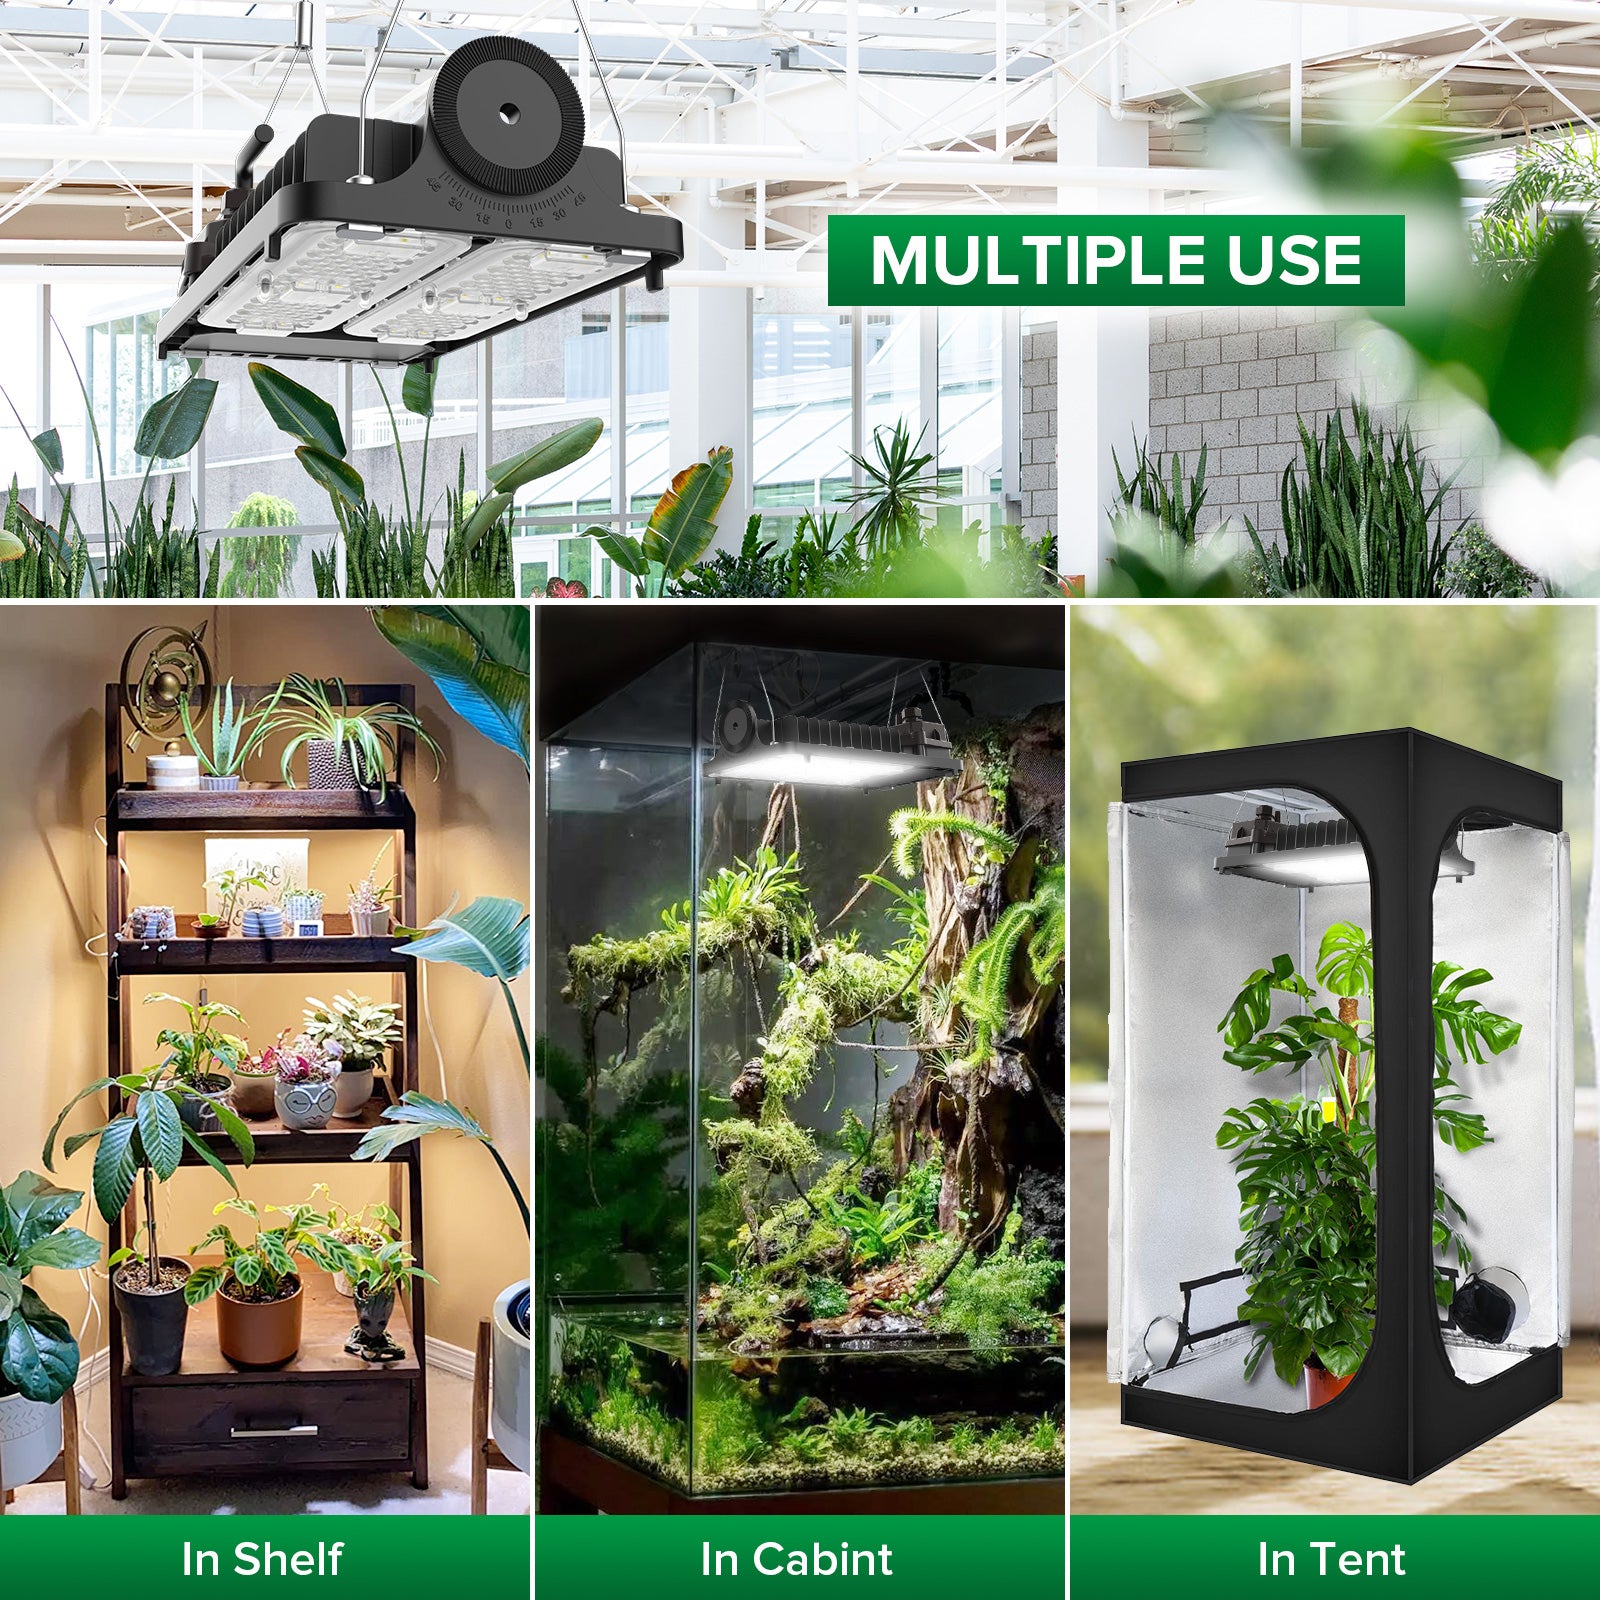 Dimmable 100W LED Grow Light for large plants indoor has multiple use, suitable for shelf, cabint and tent